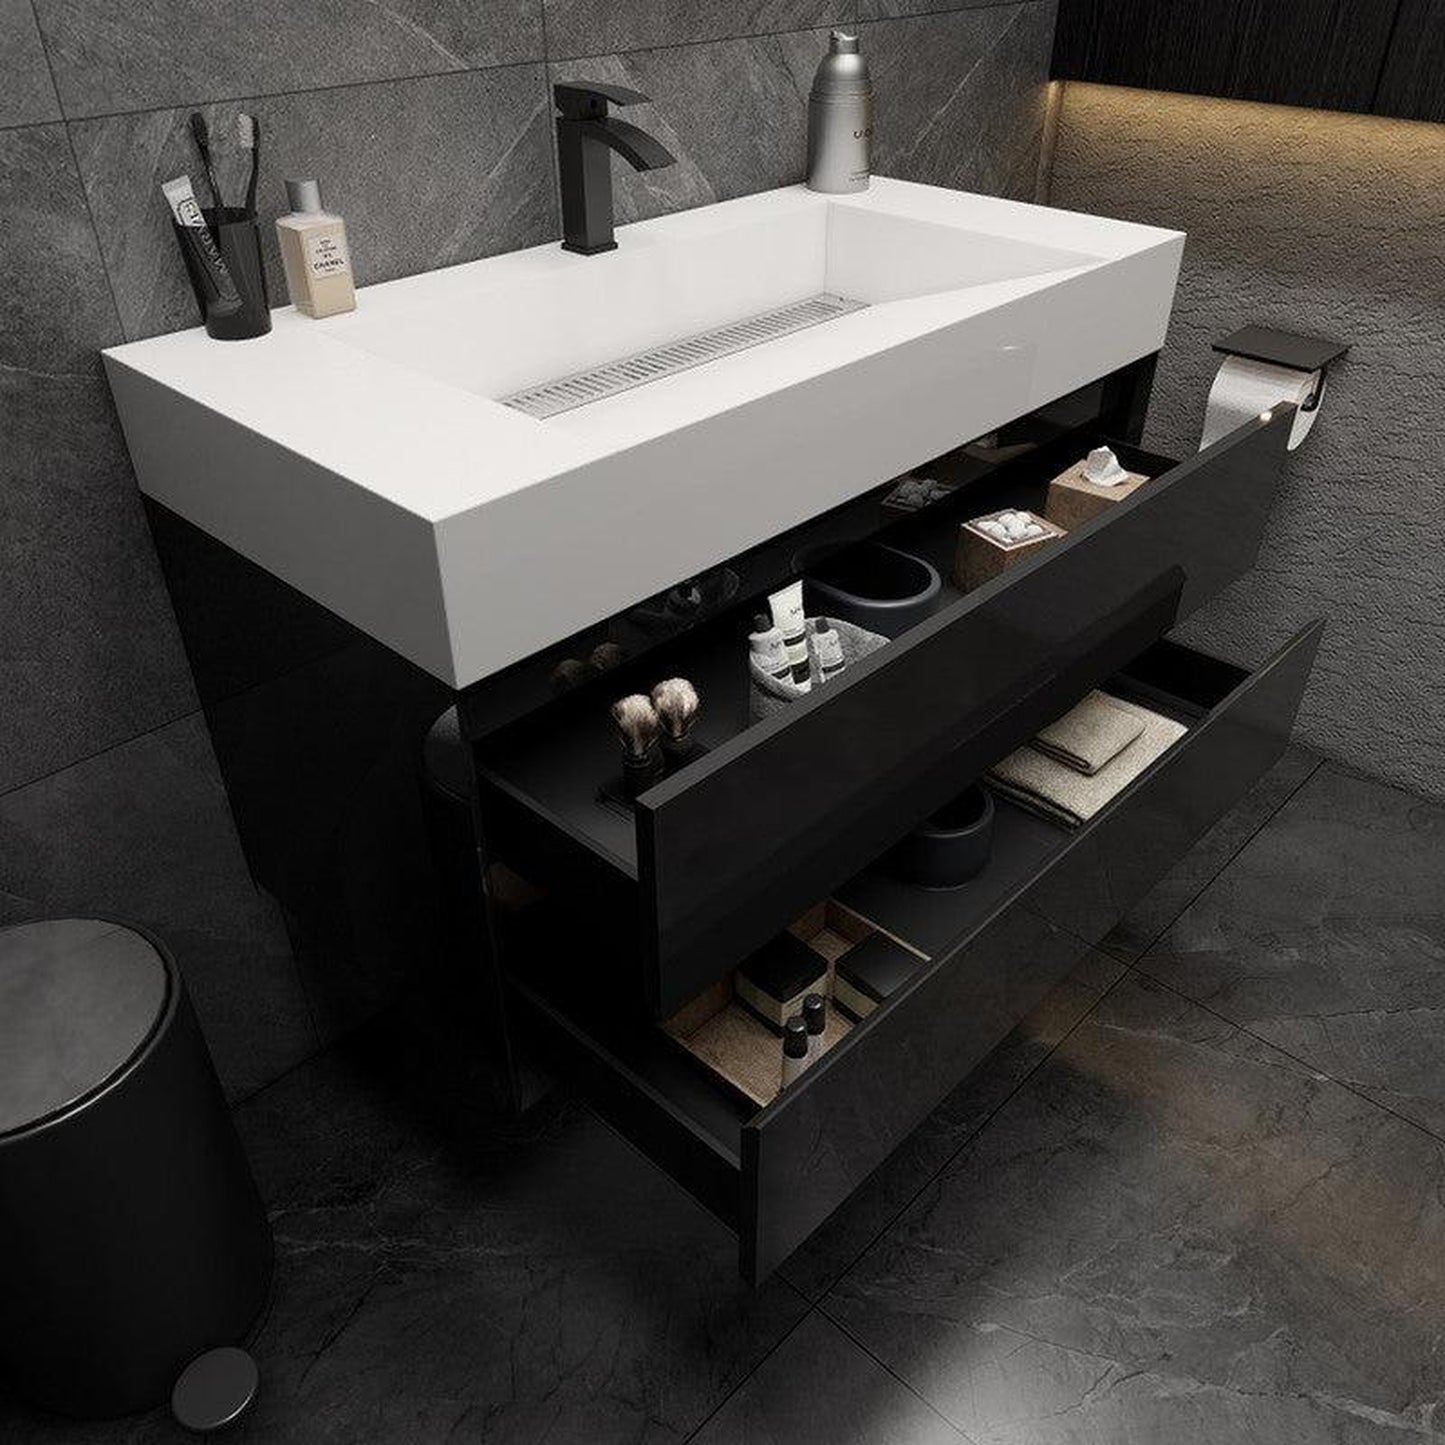 Moreno Bath MAX 42" Gloss Black Wall-Mounted Vanity With Single Reinforced White Acrylic Sink